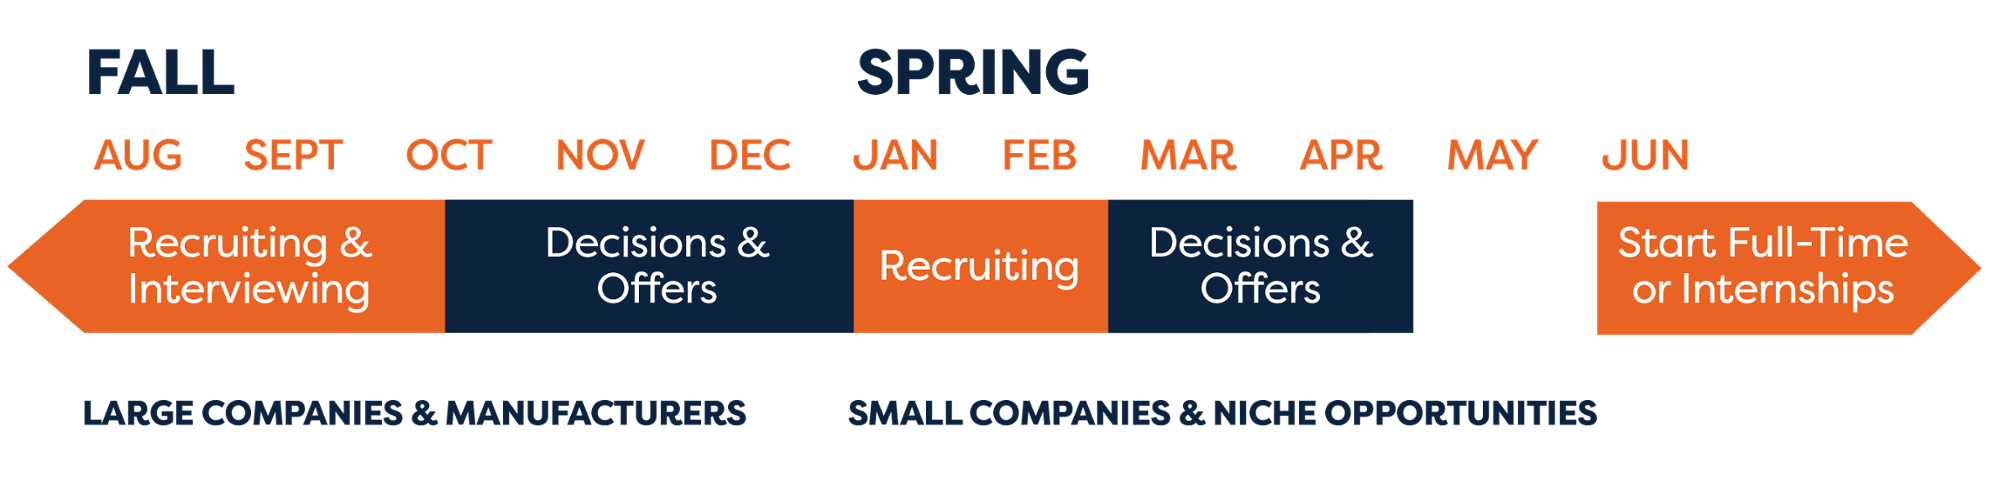 Aug - Oct: Recruiting and INverviewing, Nov - Dec: Confirming decisions and making offfers, Jan - Feb: Recruiting, Mar - Apr: Confirming decisions and making offers, June: Start full-time or internship role, Typically Larger Companies Recruit in the fall while smaller companies recruit in the spring